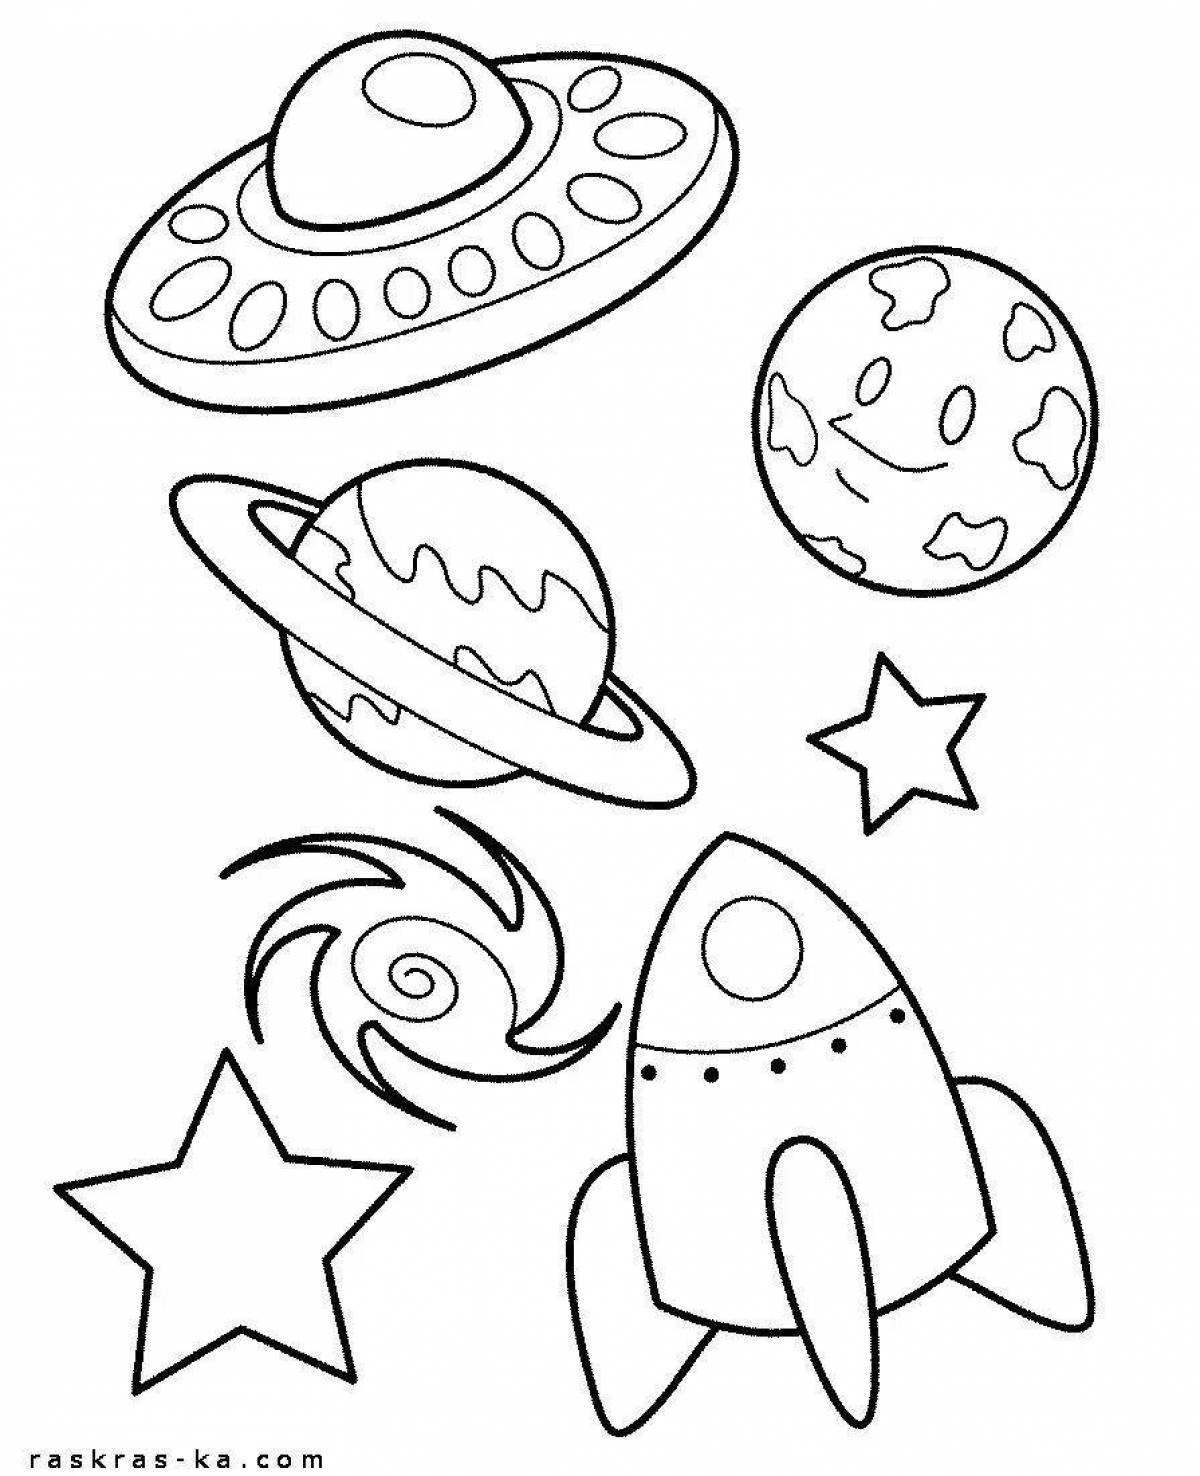 Fabulous coloring pages of space and planets for kids